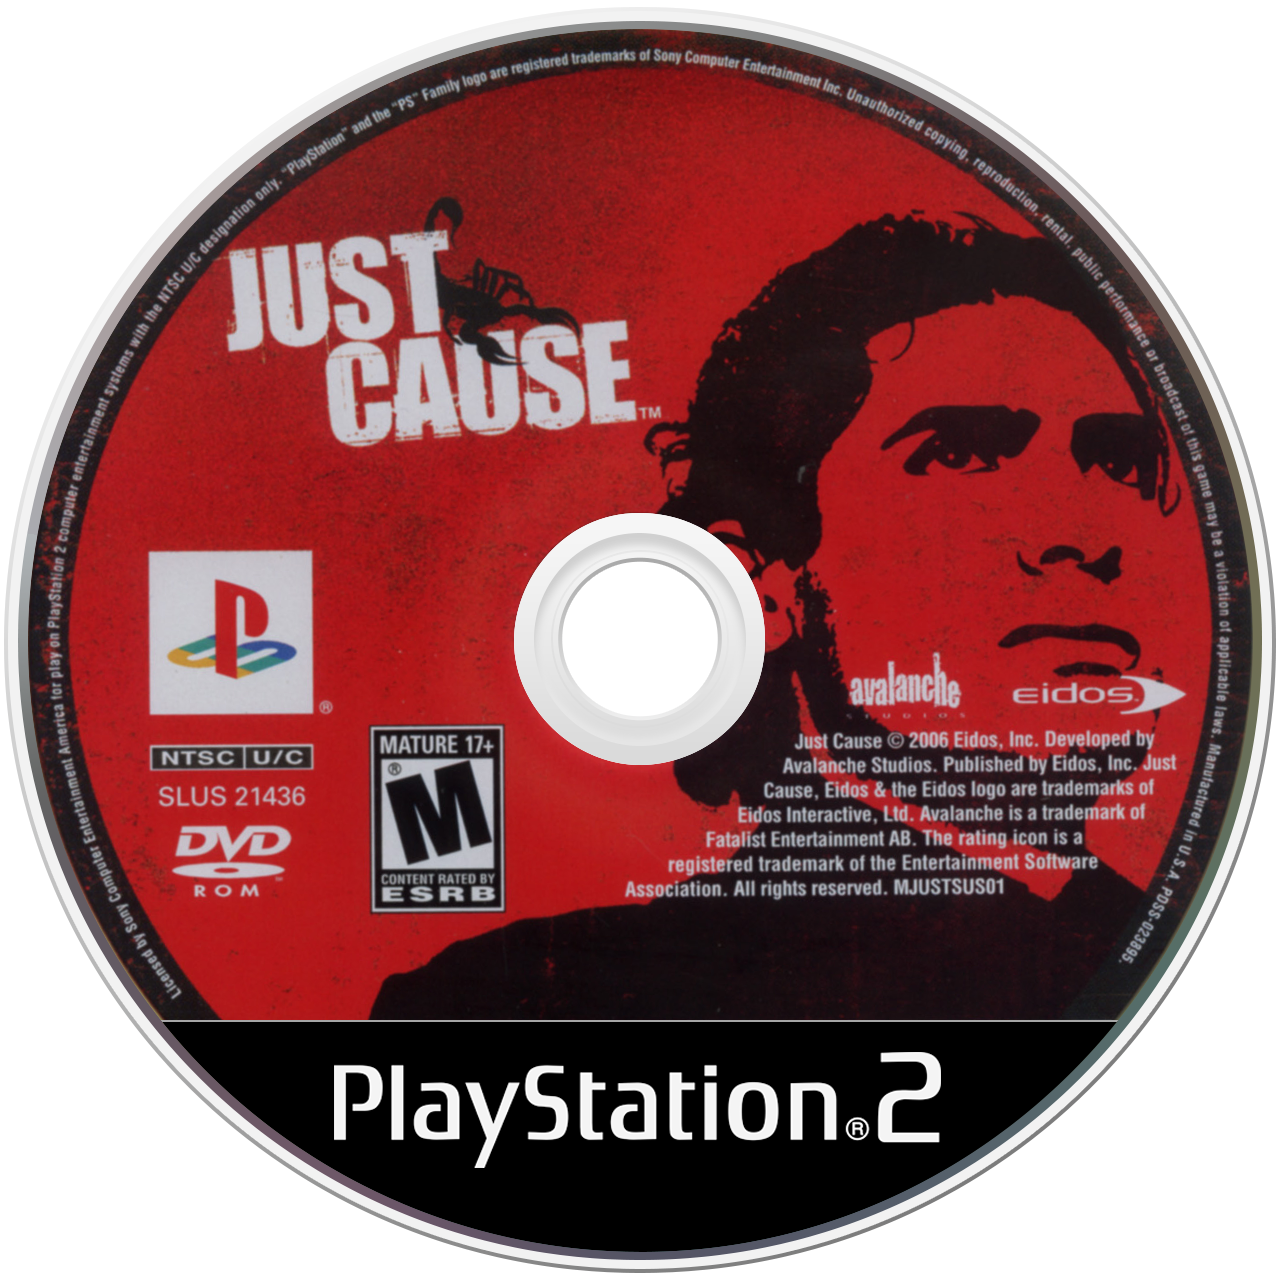 More information about "Playstation 2 Disc Images"